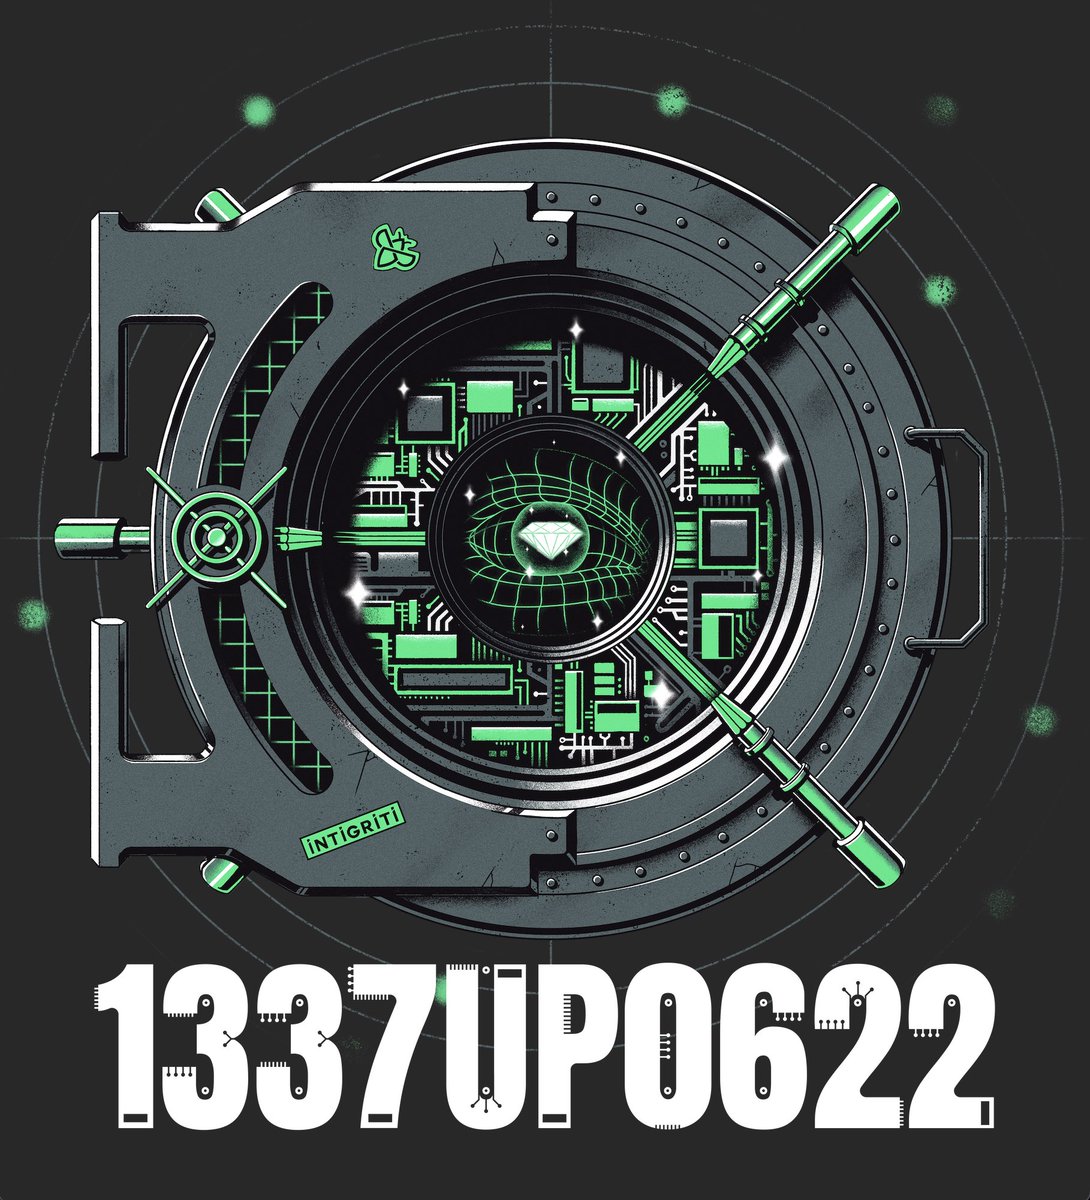 Got invited to join the #1337UP0622 live hacking event. Meeting in person with great hackers. Thank you @intigriti for this awesome opportunity! Looking forward to it! 

#HackWithIntigriti #bugbounty